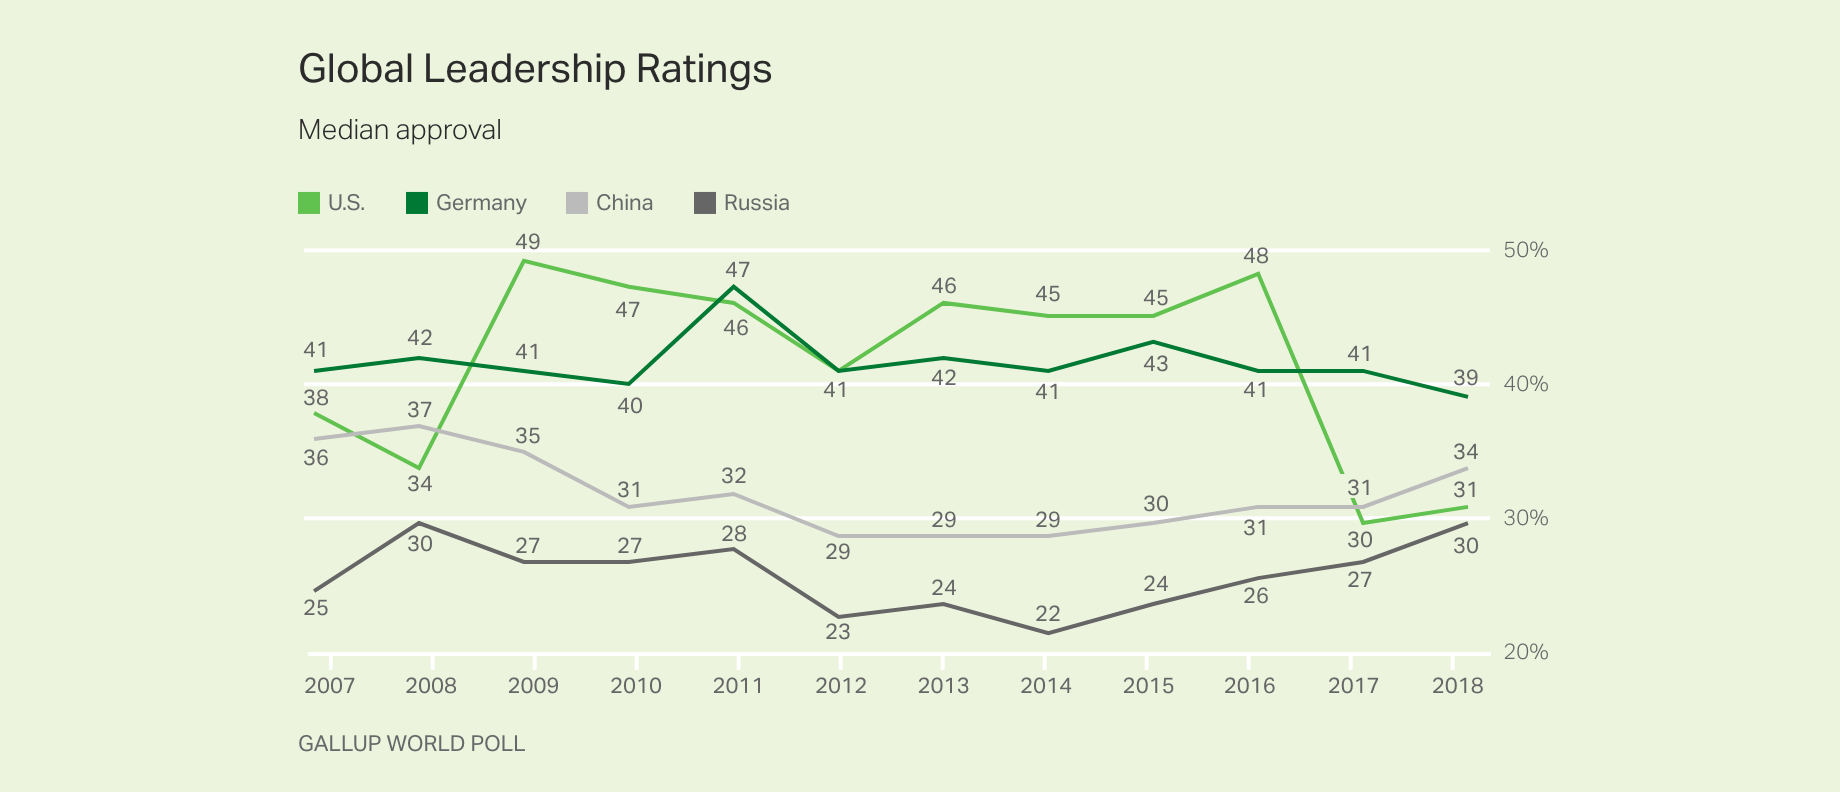 Line graph. Germany’s leadership earns the highest approval ratings worldwide, while Russia and the U.S. tie for the lowest.